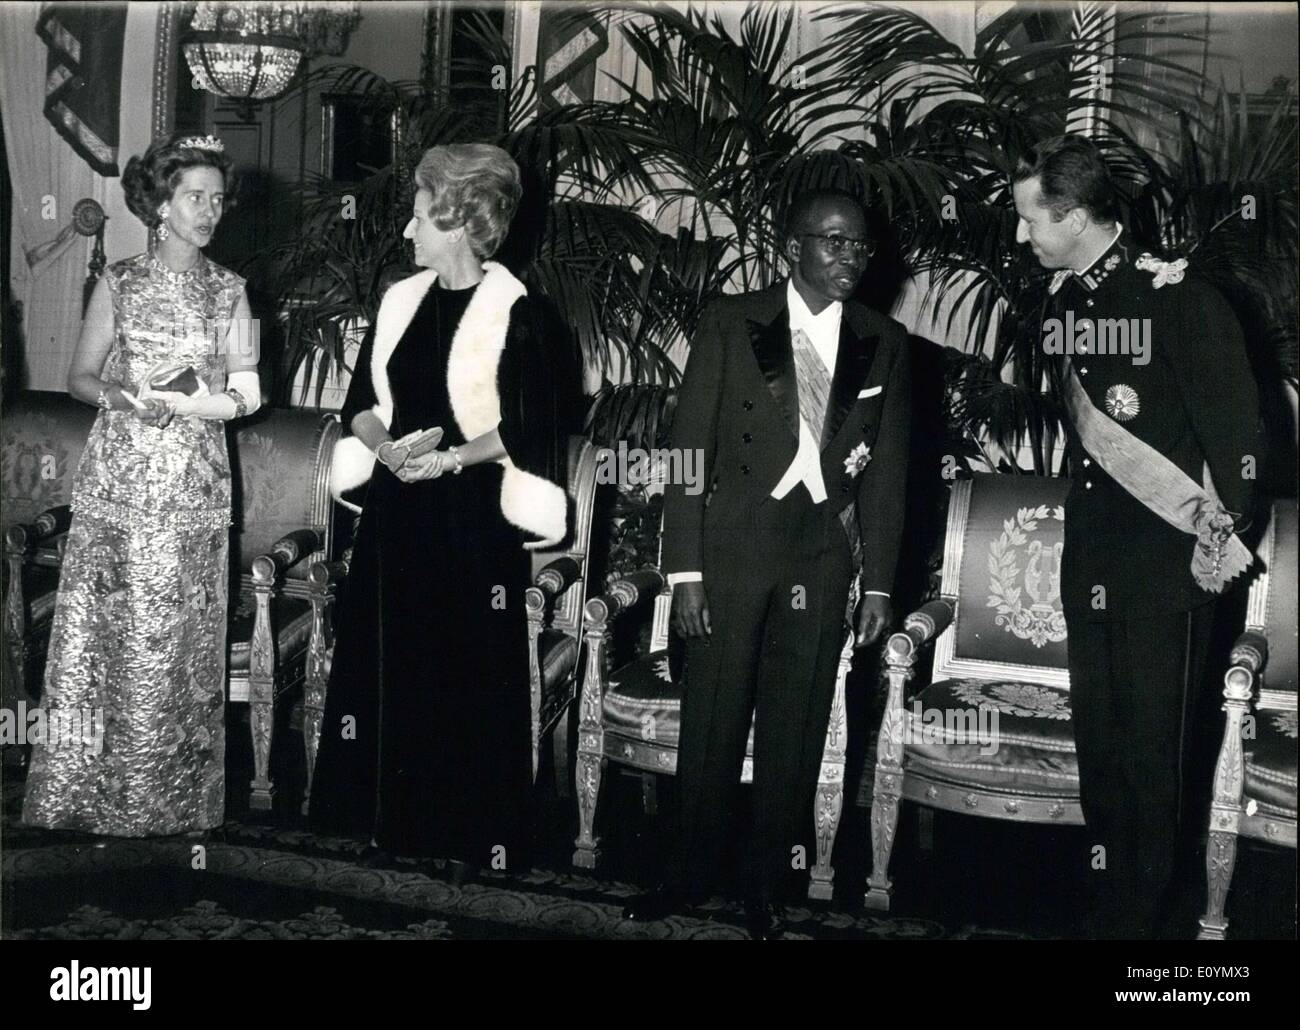 Oct. 22, 1970 - At the Brussels Royal Palace, left to right: Queen Fabiola, Madame Senghor, President Senghor, and King Baudouin. Stock Photo